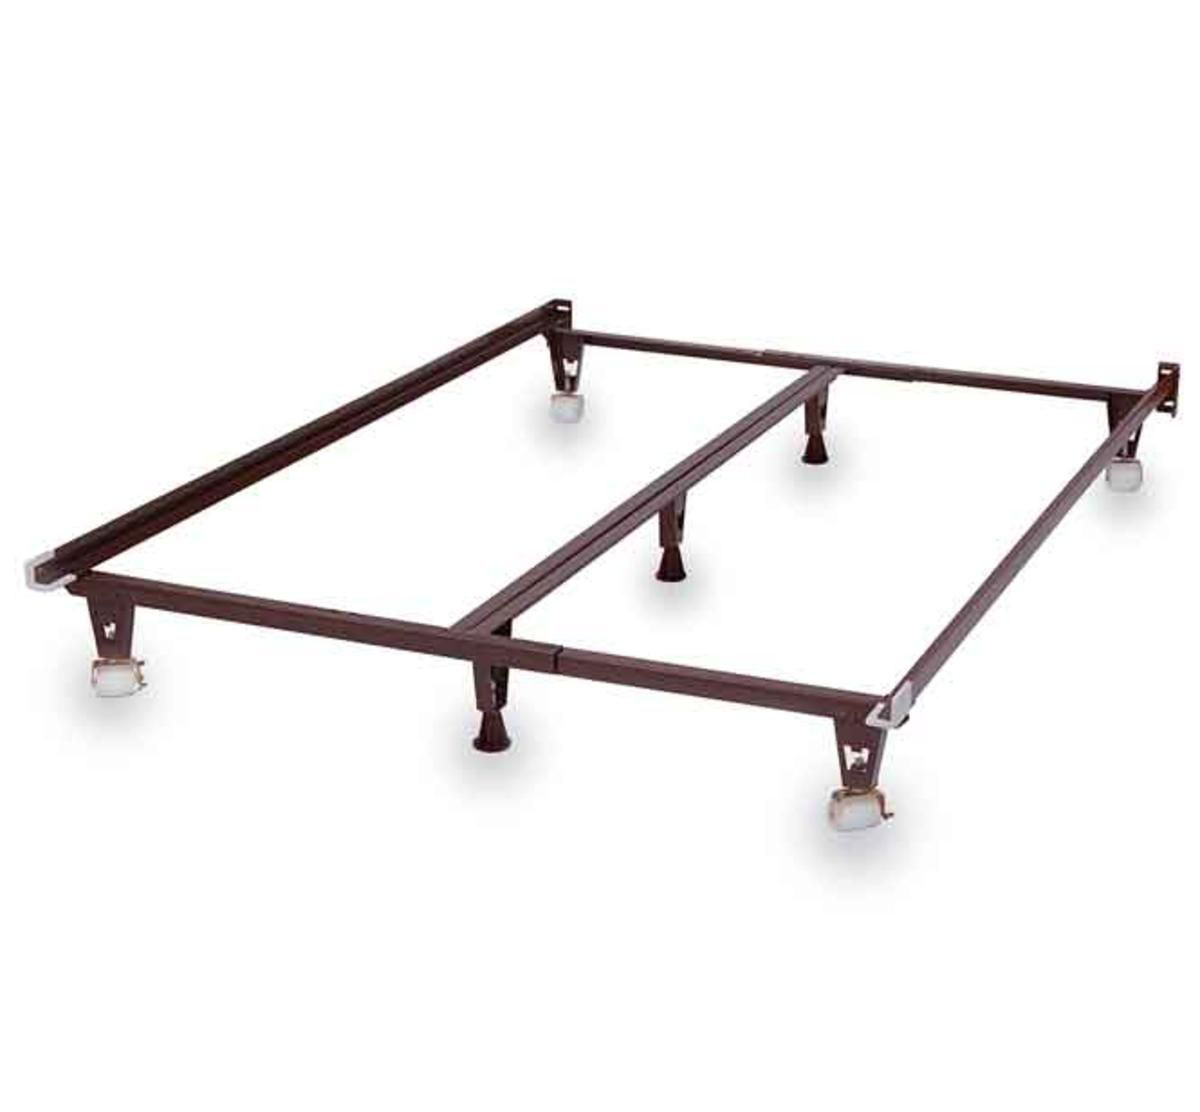 Ultra Premium Universal Bed Frame, Heavy Duty Steel Bed Frame